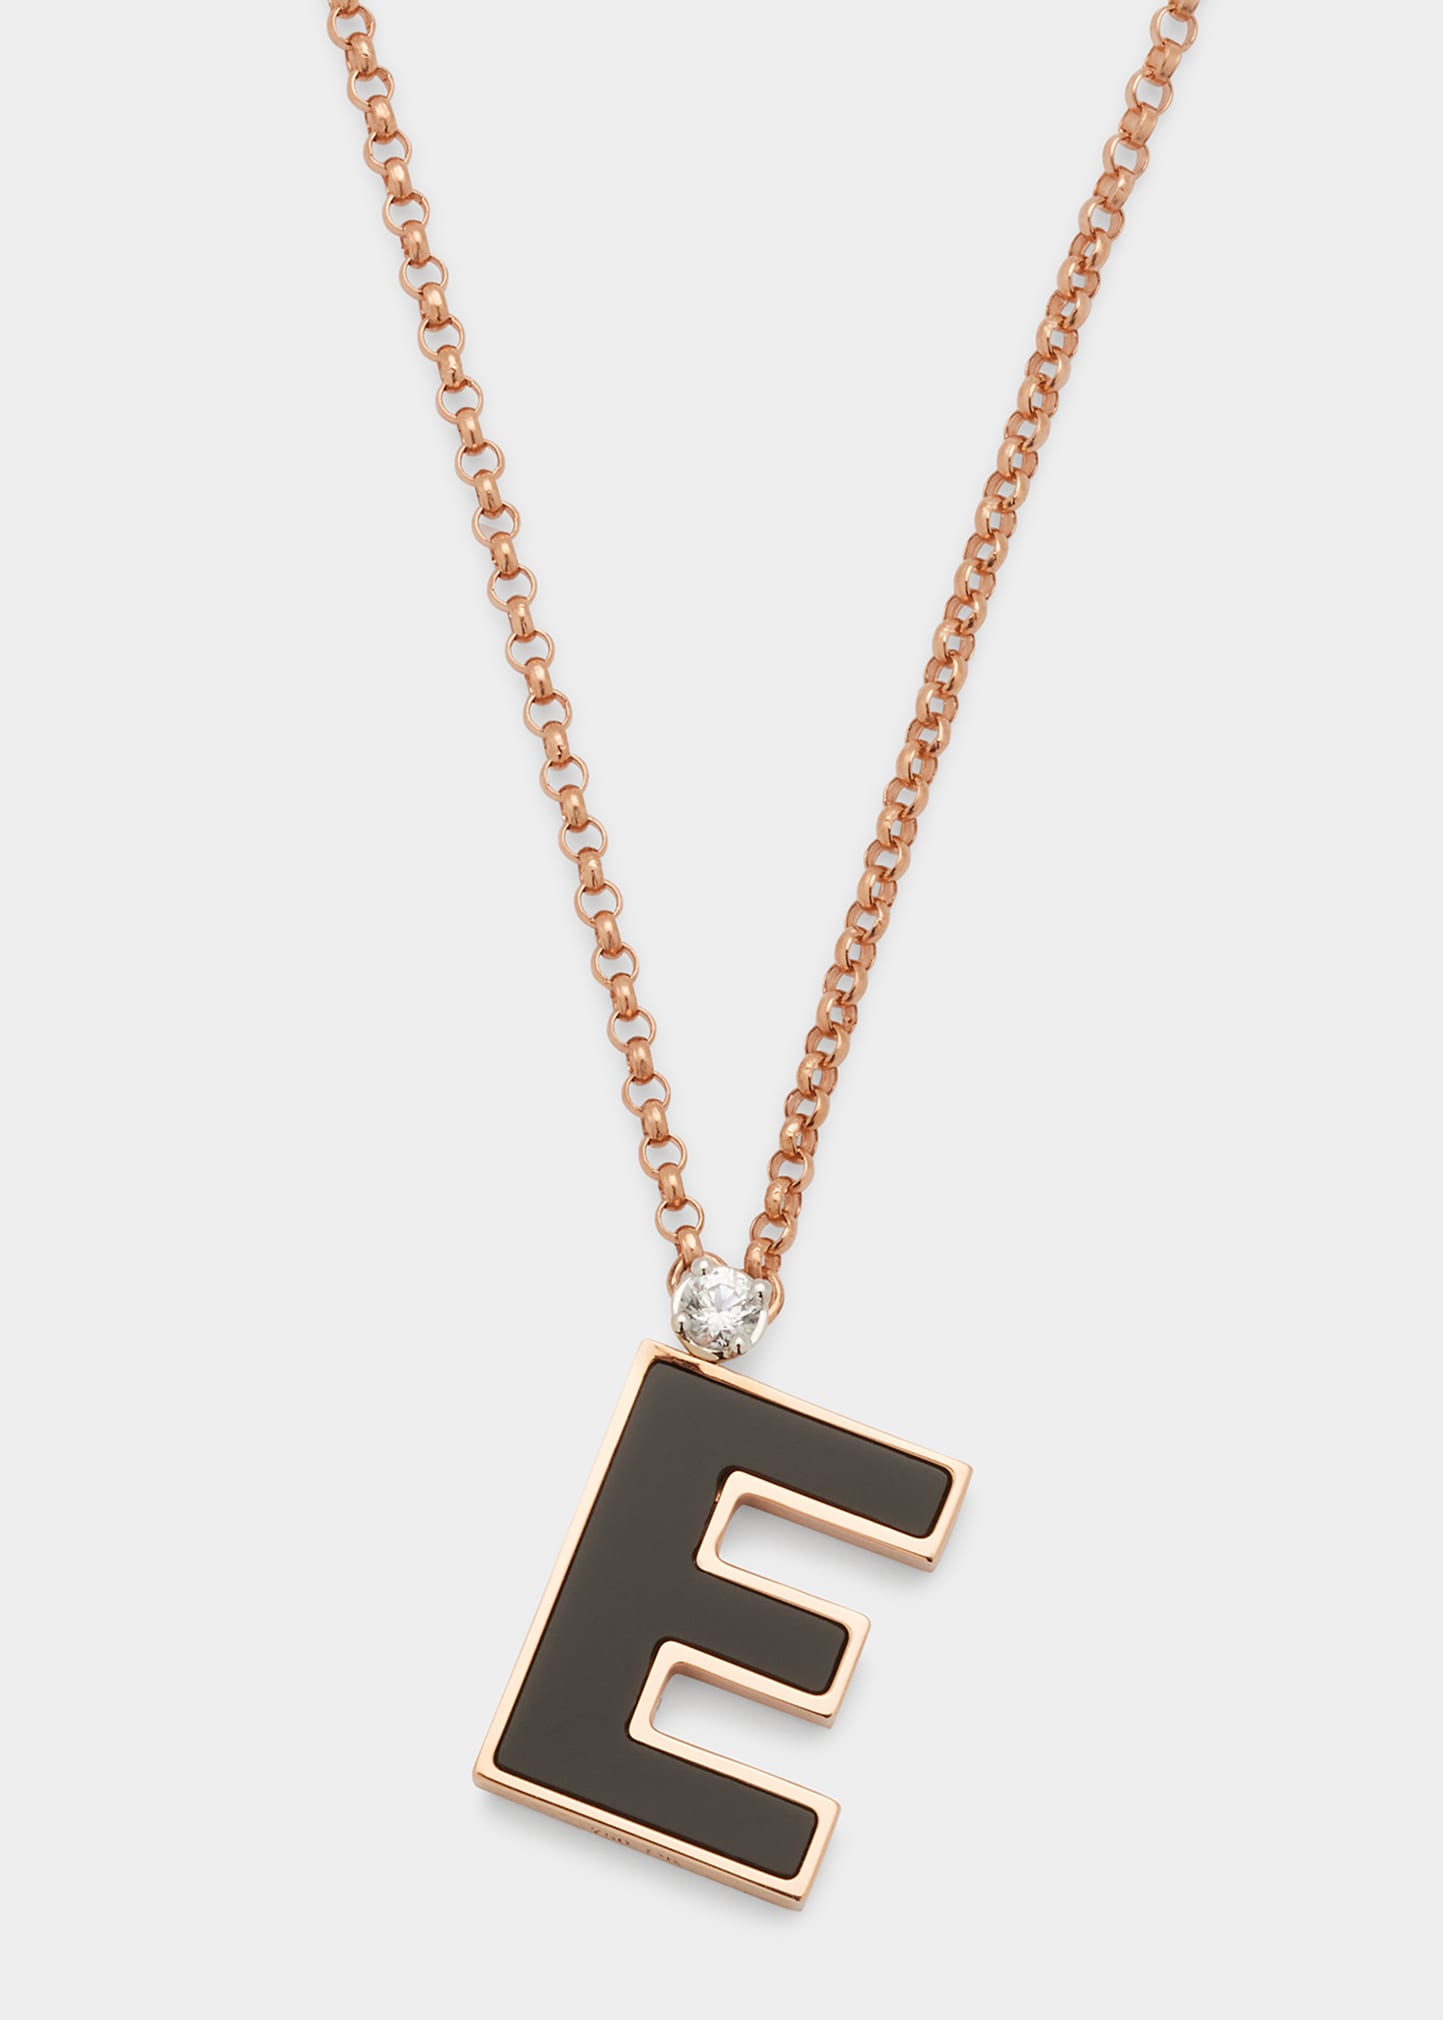 Rose Gold 'E' Letter Charm Necklace with Onyx and White Sapphire